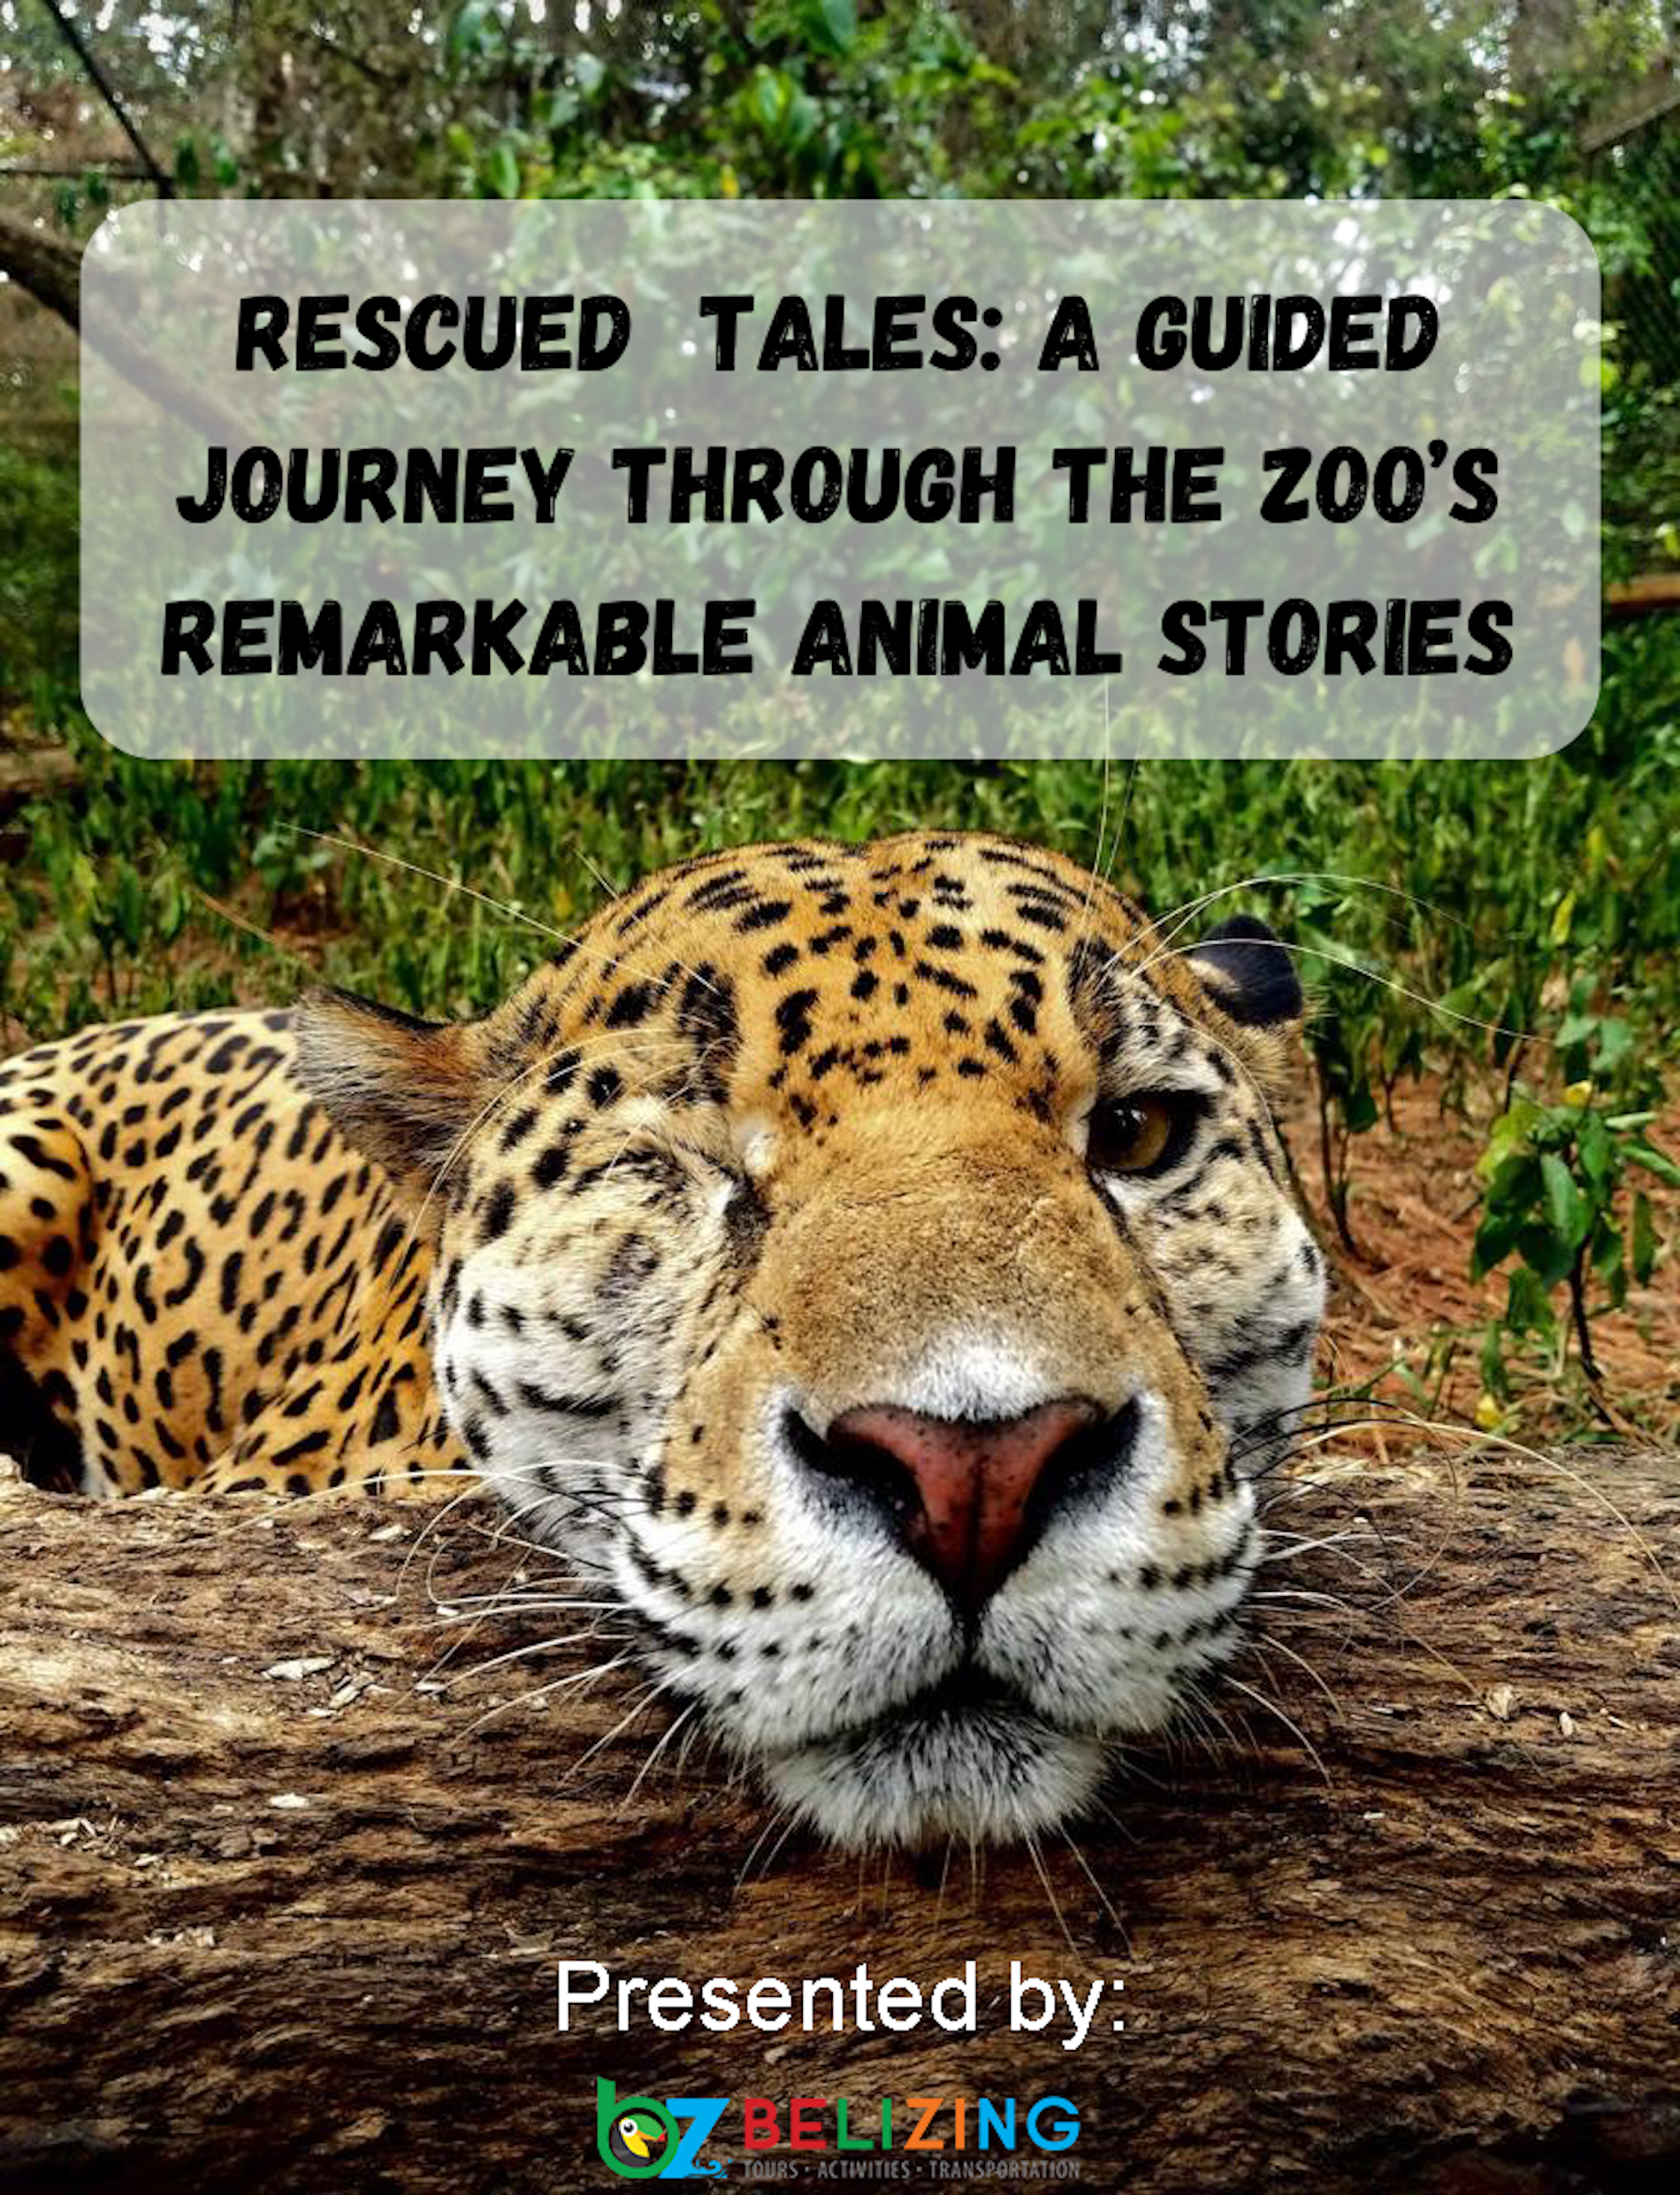 Rescued Tales: A Guided Journey through the Zoo's Remarkable Animal Stories